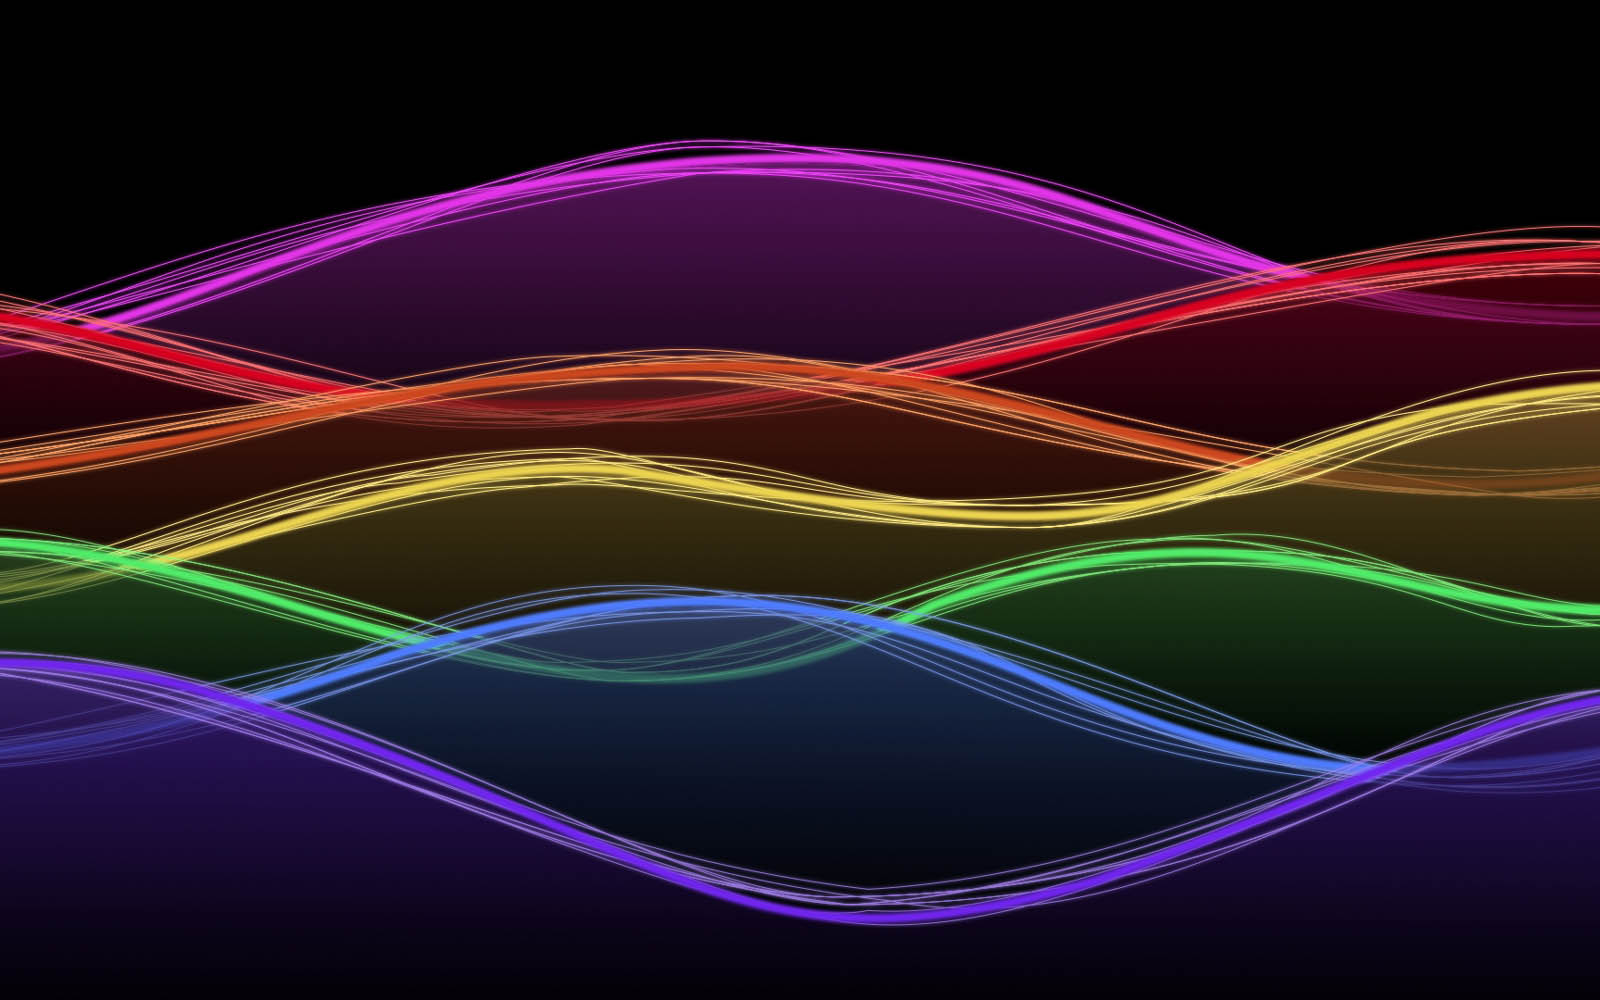 Neon Art Wallpaper Background Photos Image And Pictures For